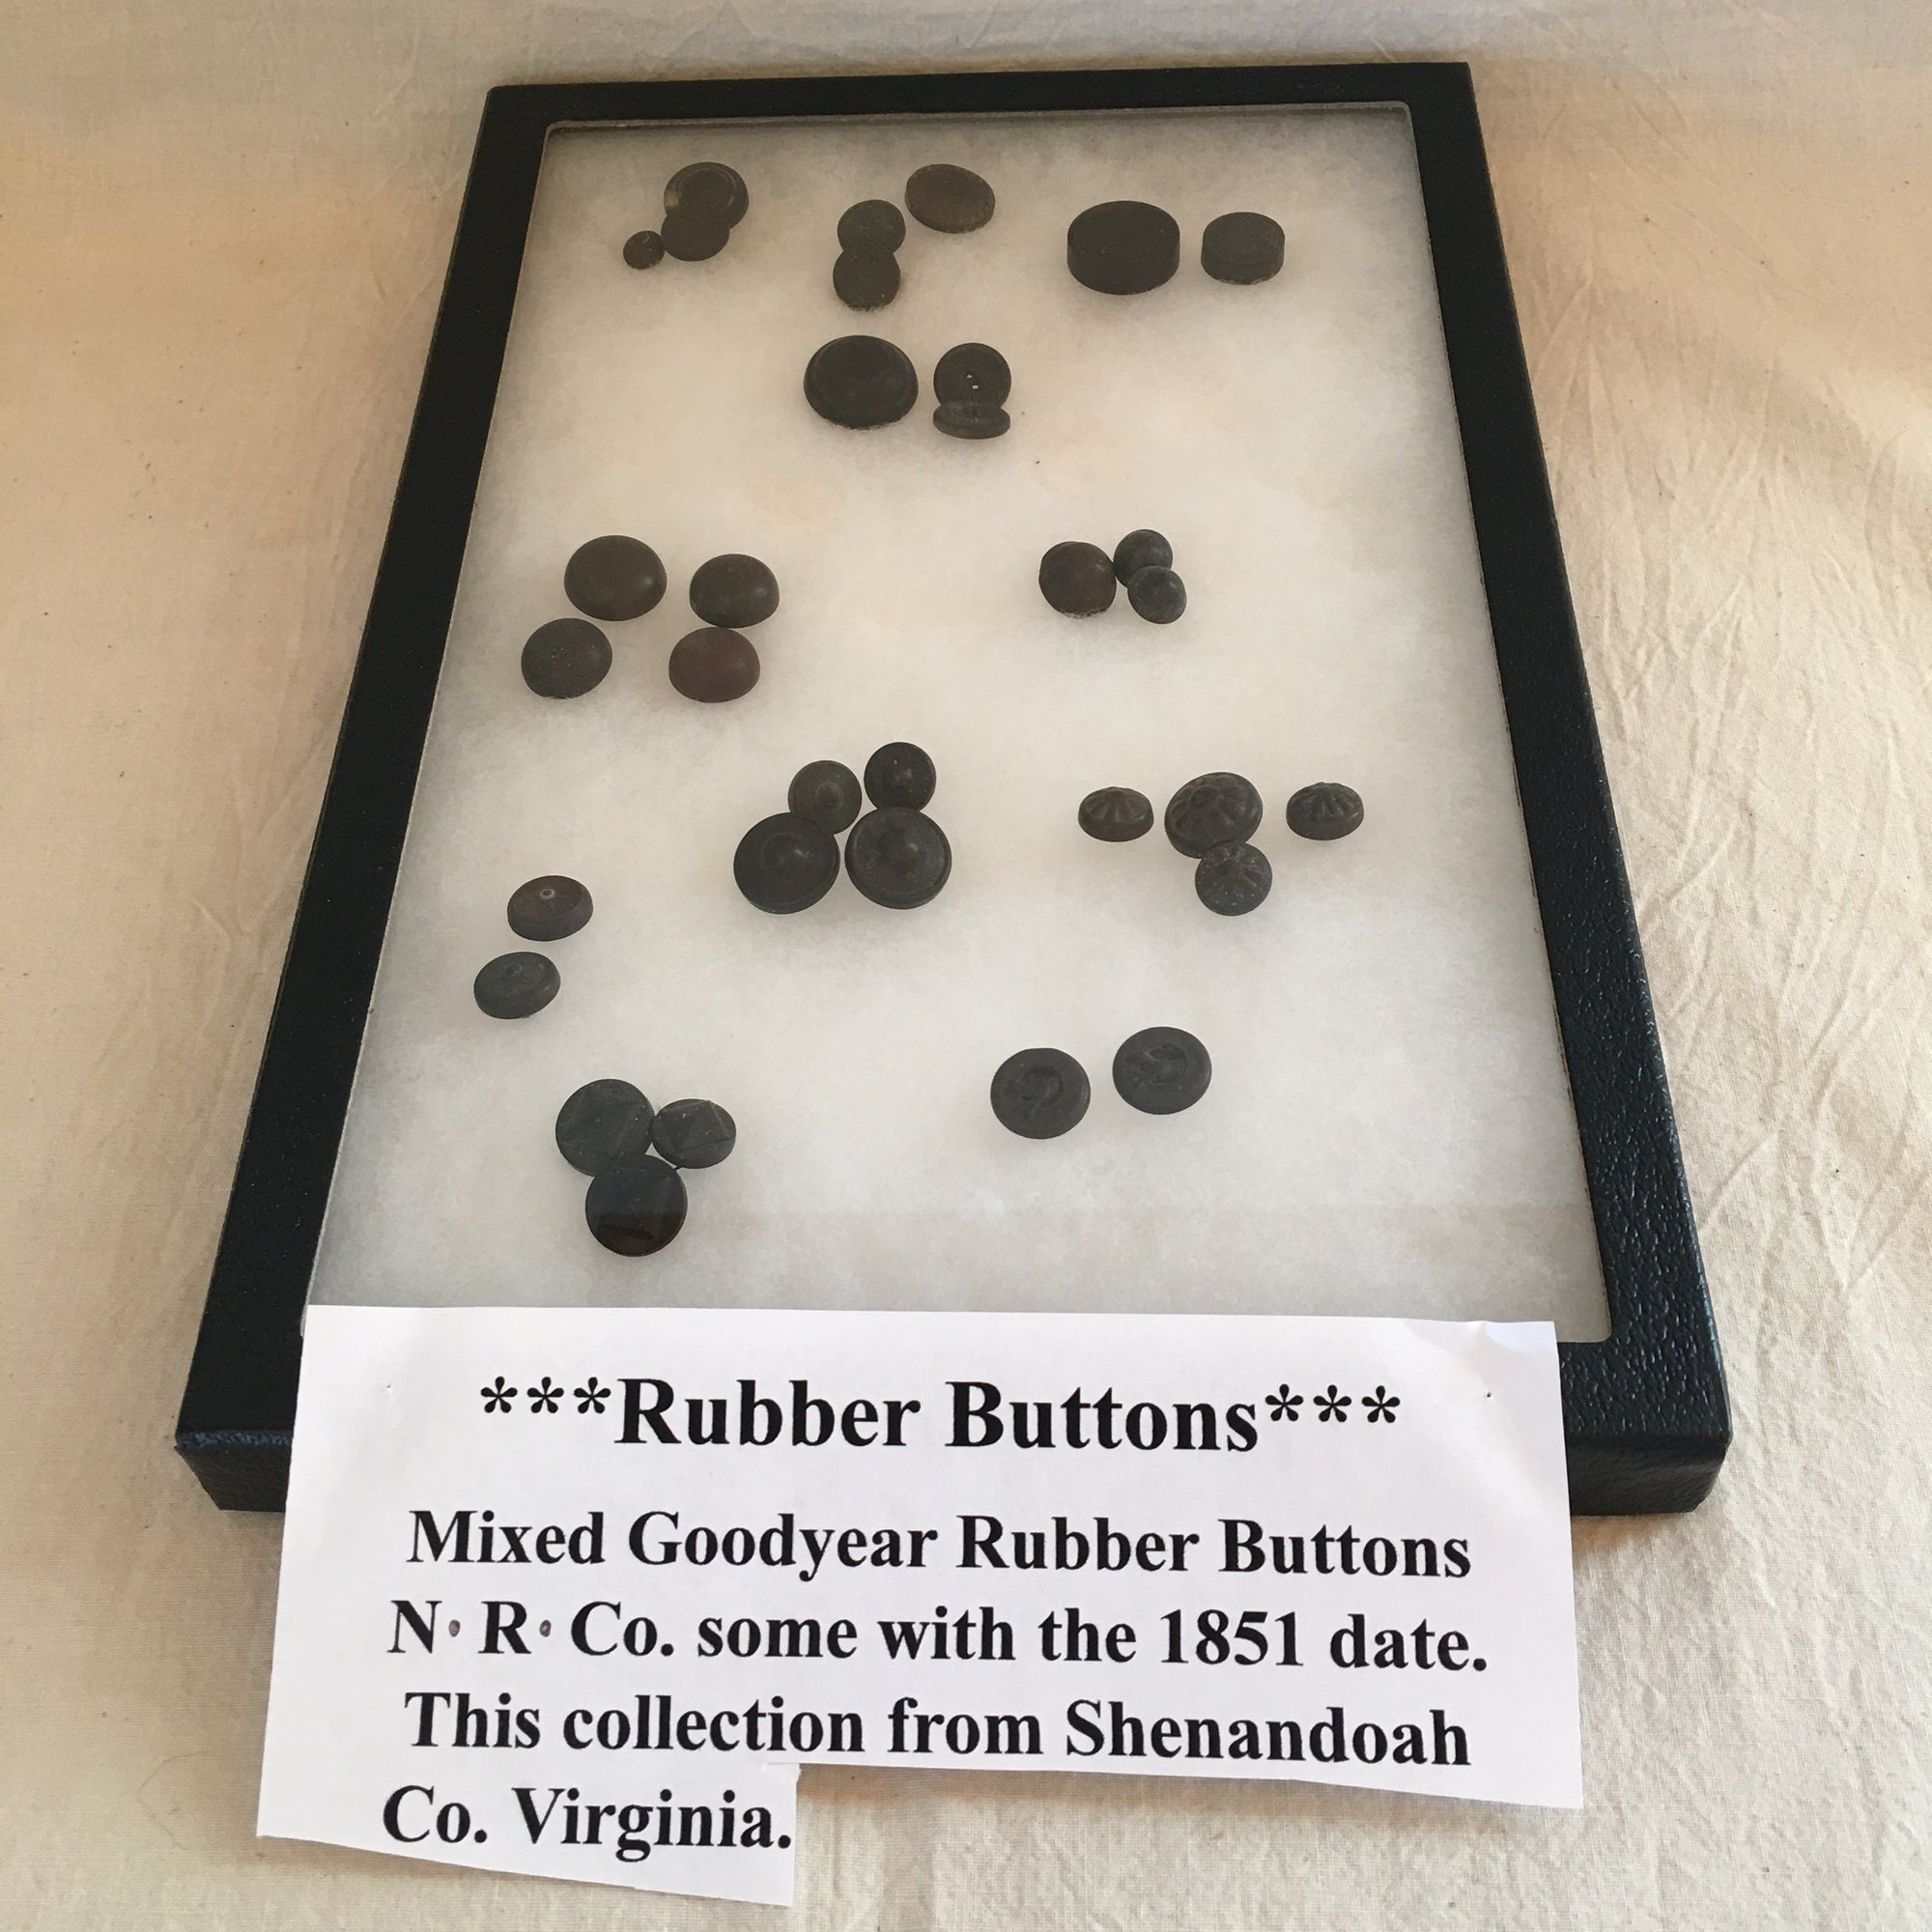 Collection of 33 Antique Rubber Buttons, Goodyear N.R. Co. Some Marked 1851